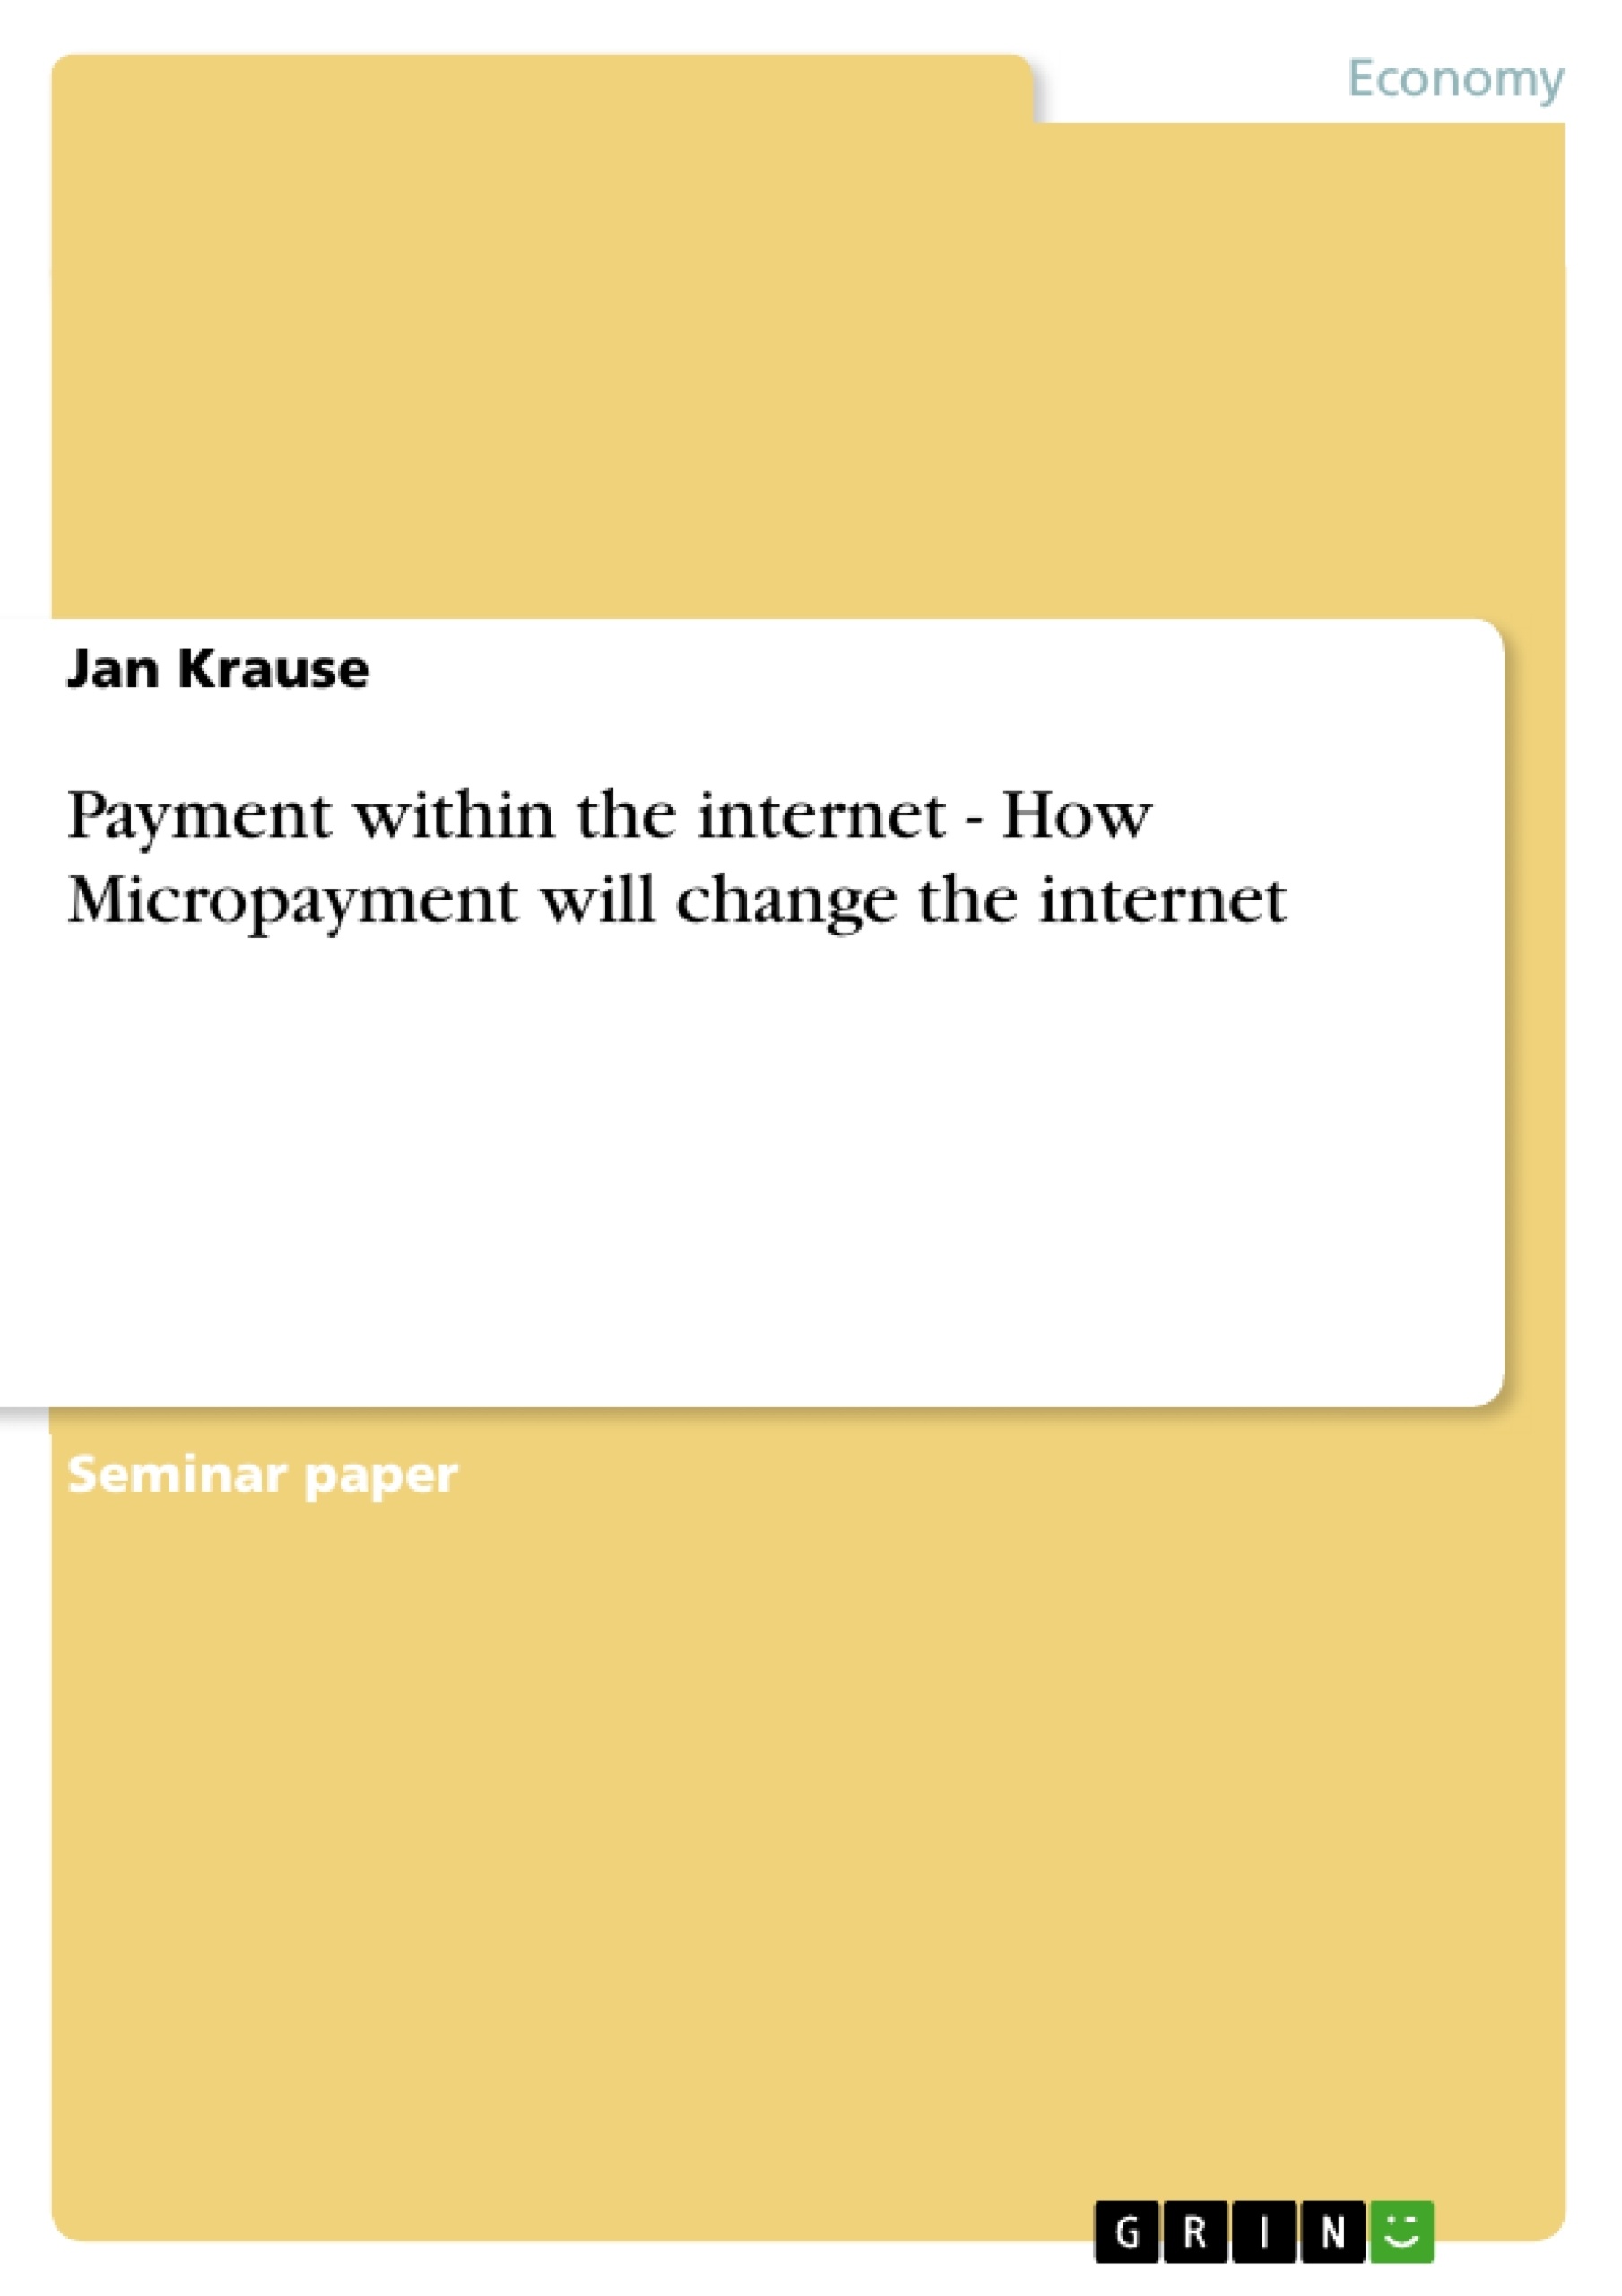 Title: Payment within the internet - How Micropayment will change the internet